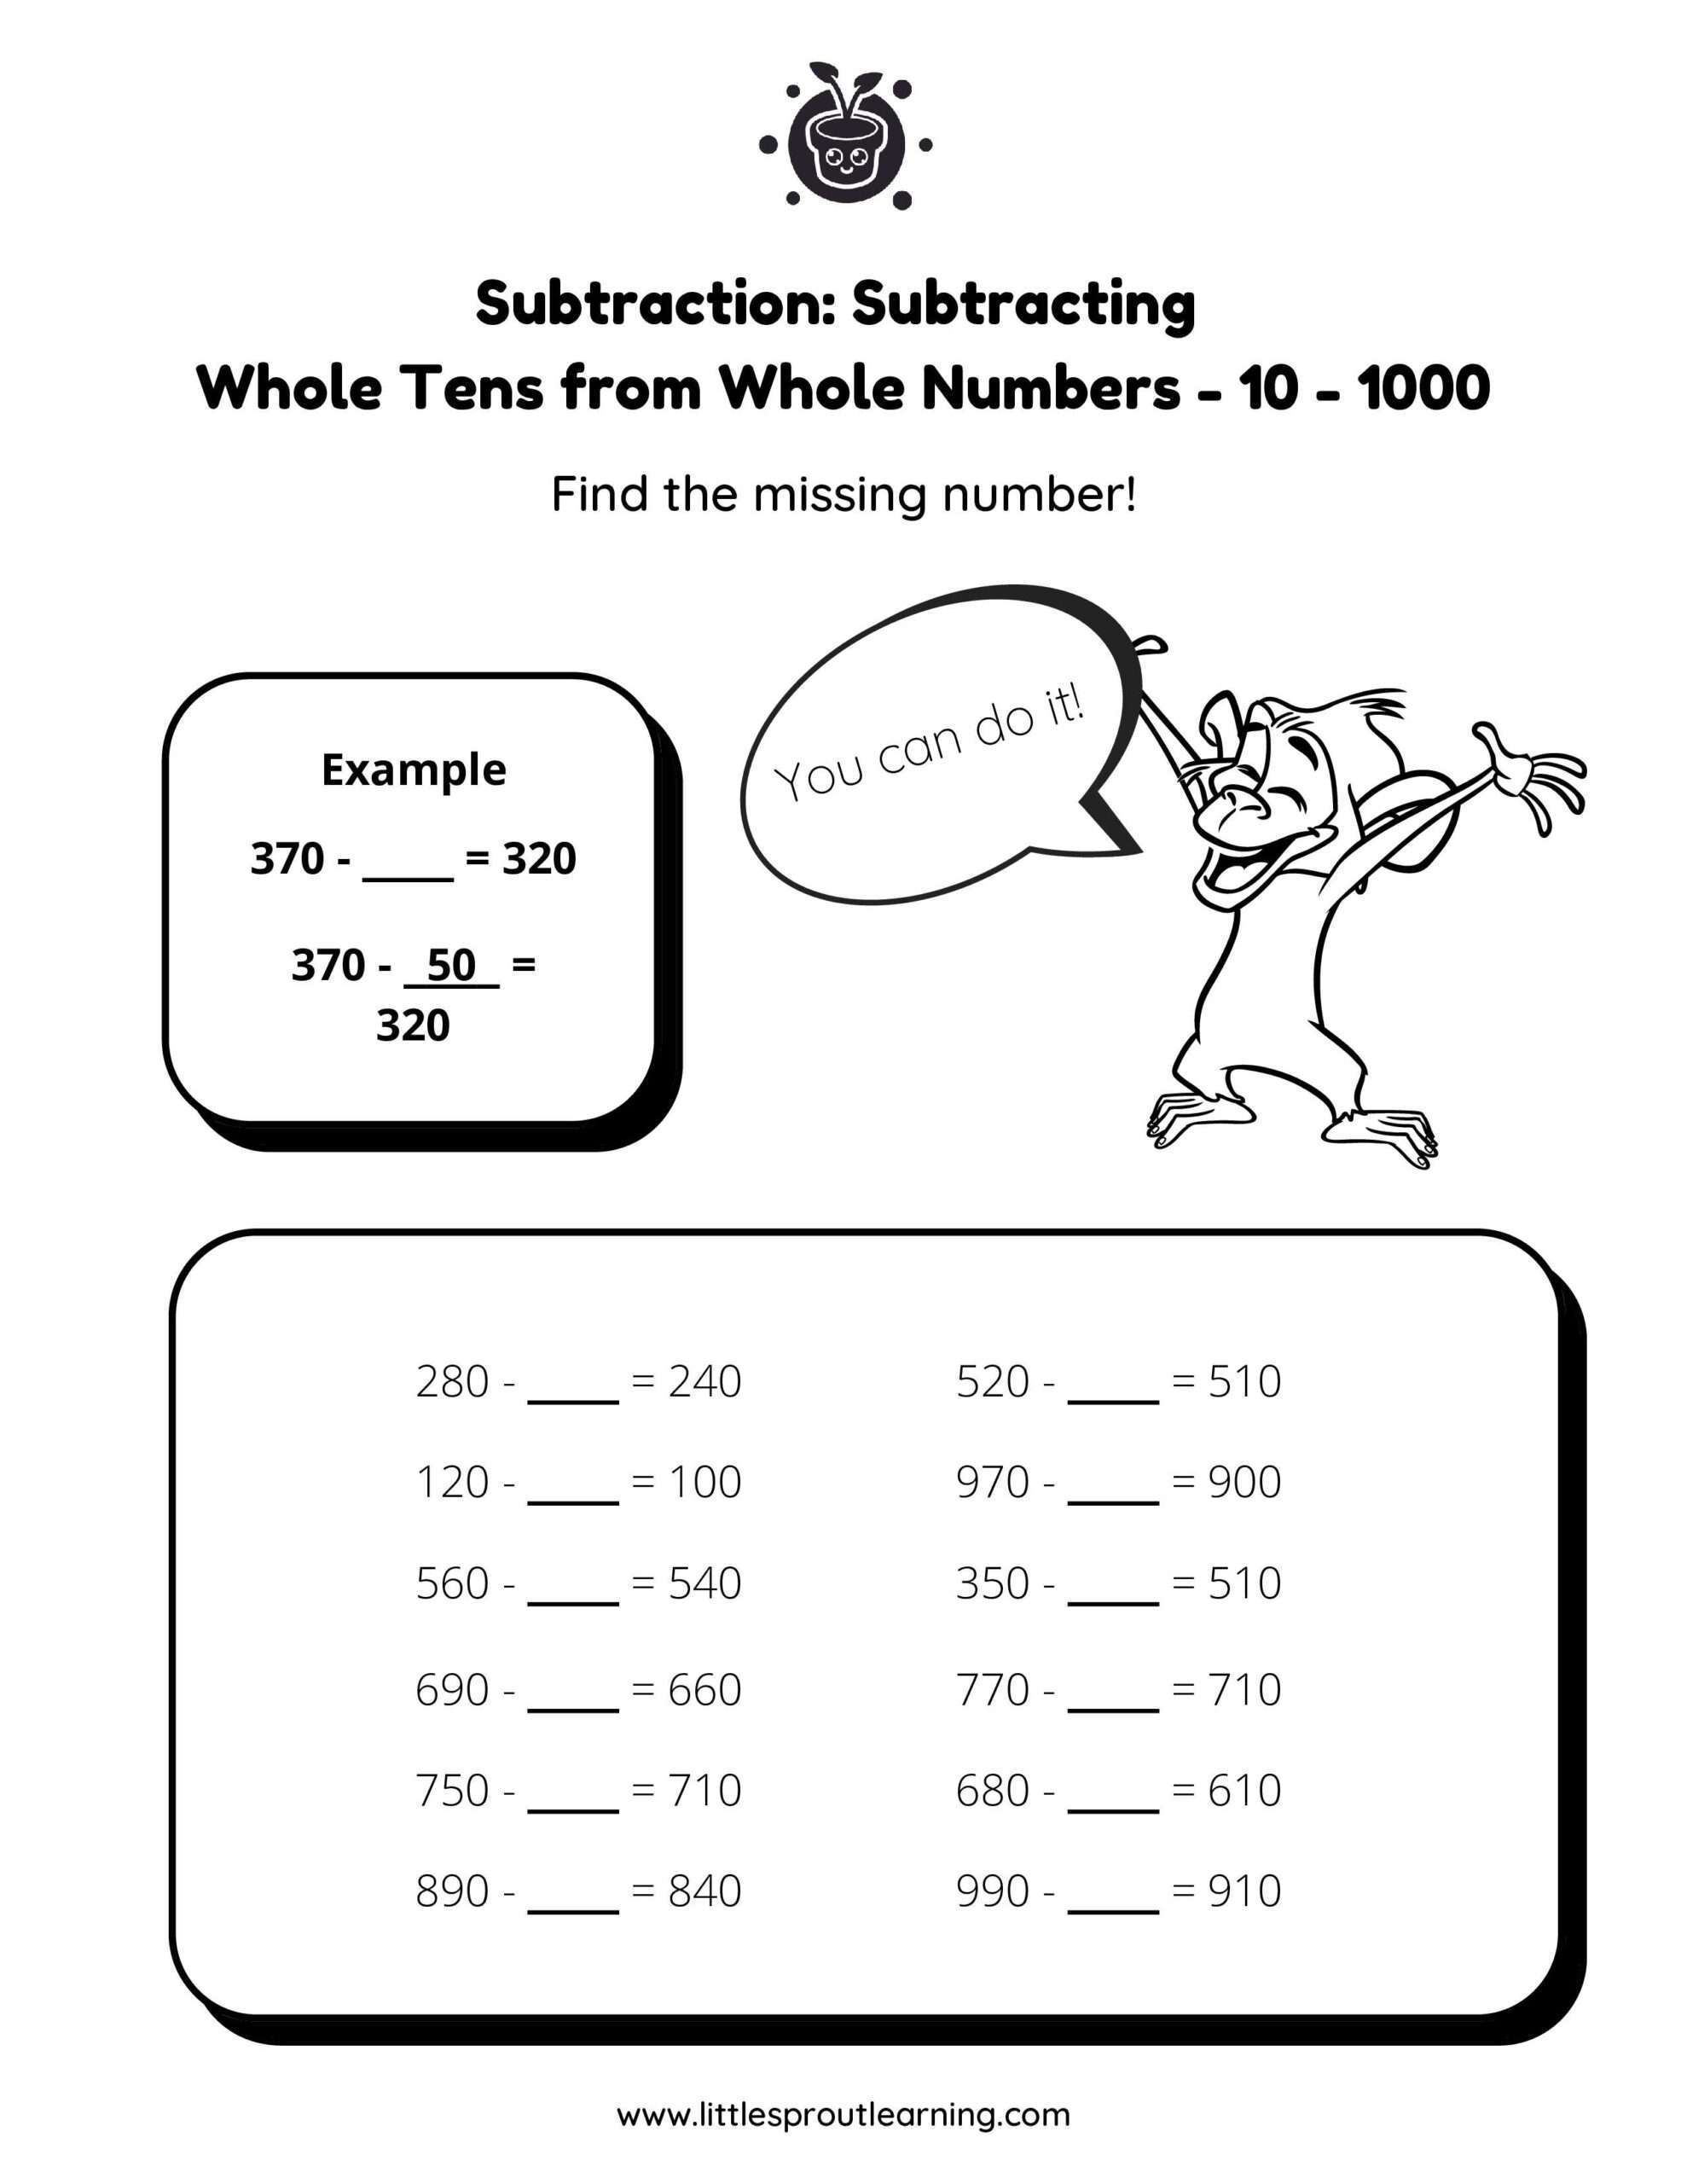 Subtract Whole Tens From Whole Tens Within 0-1,000